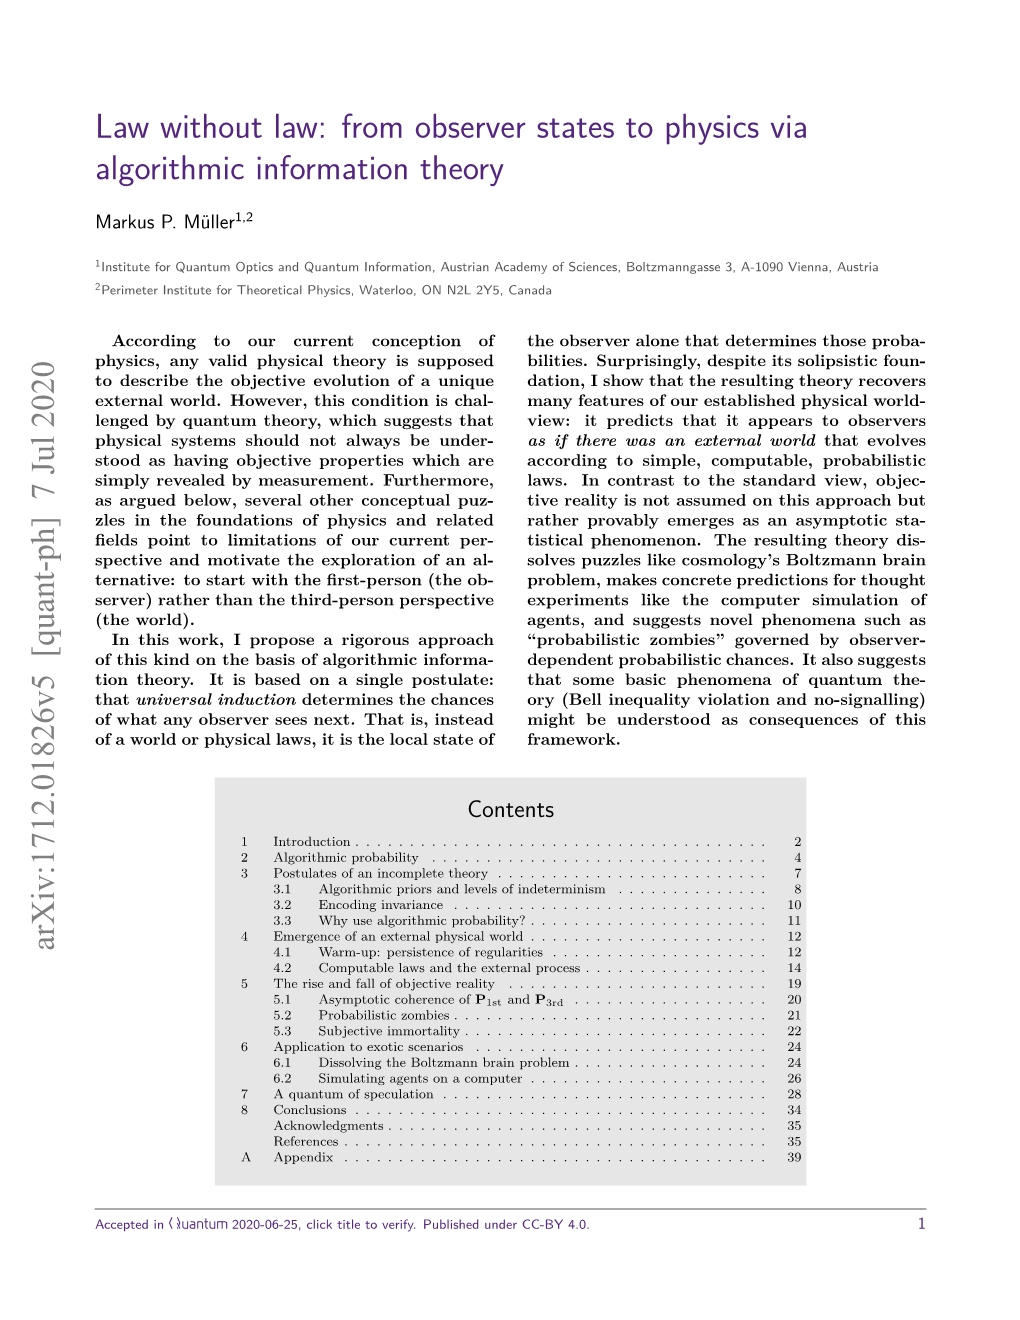 From Observer States to Physics Via Algorithmic Information Theory